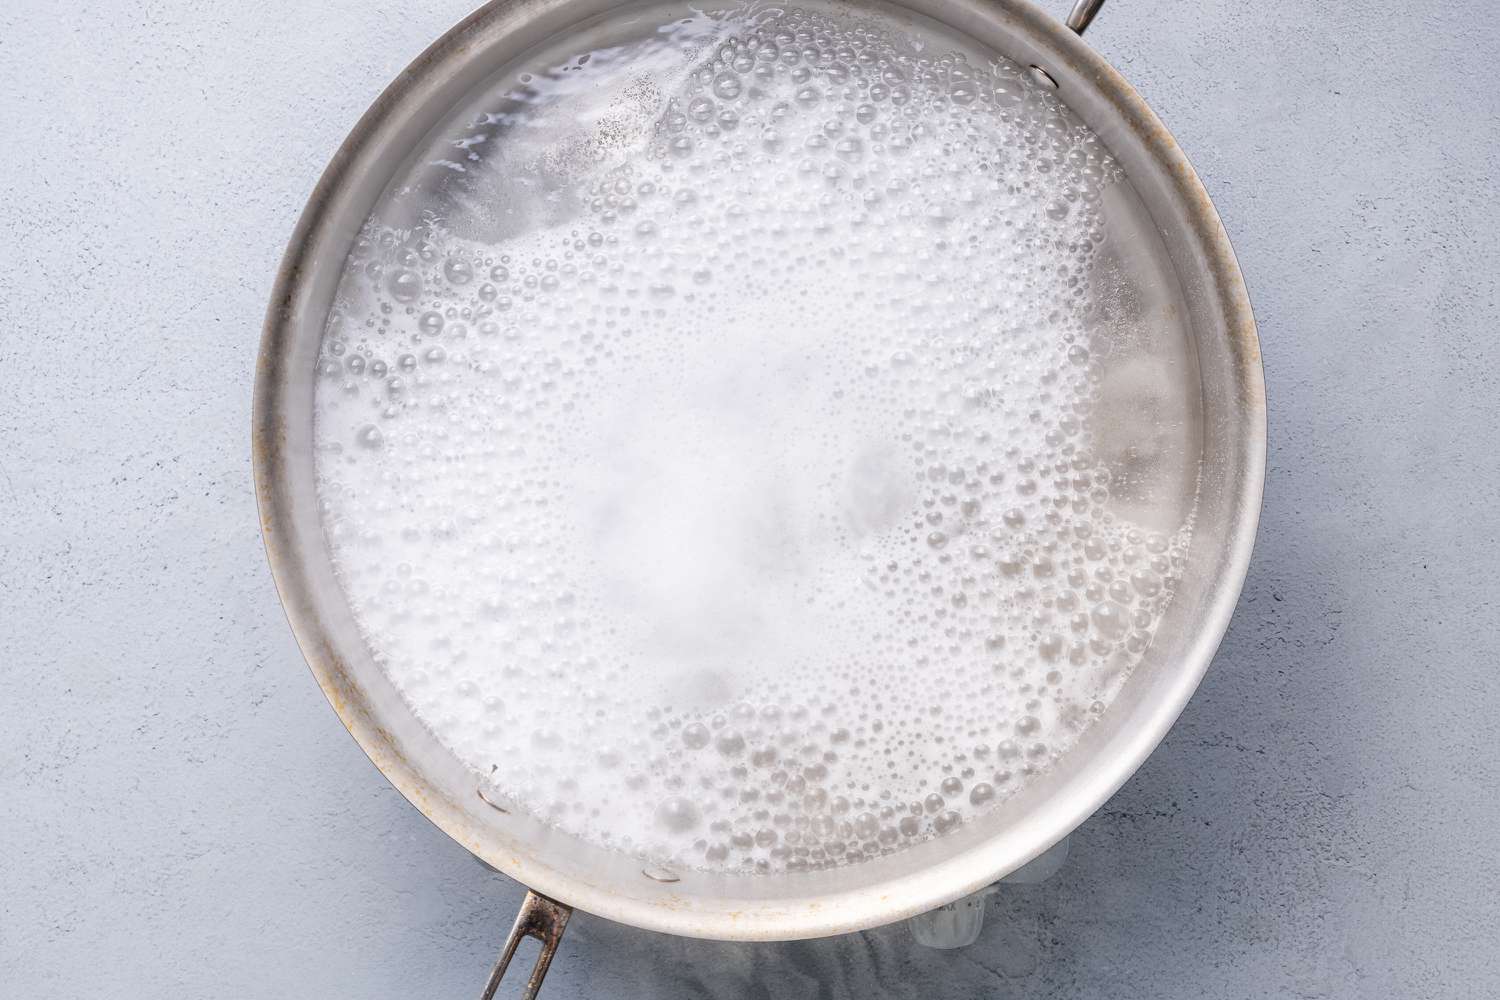 Baking soda added to the pot of boiling water